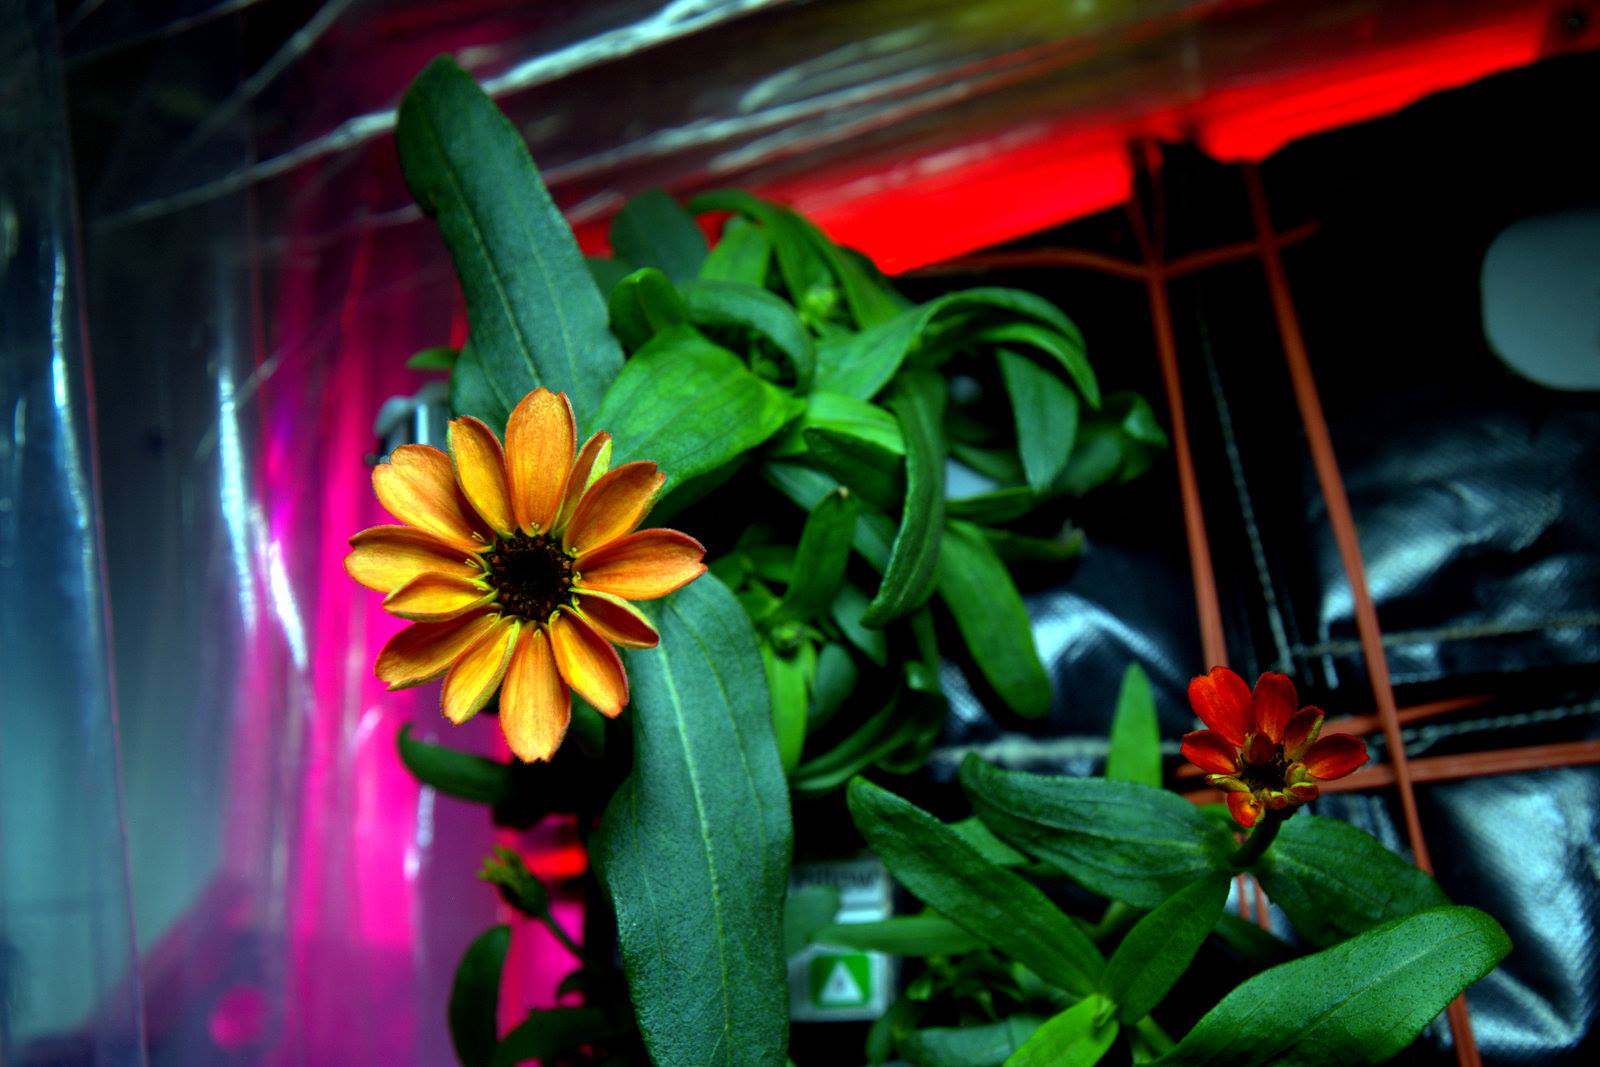 A composite flower under red lights at the International Space Station